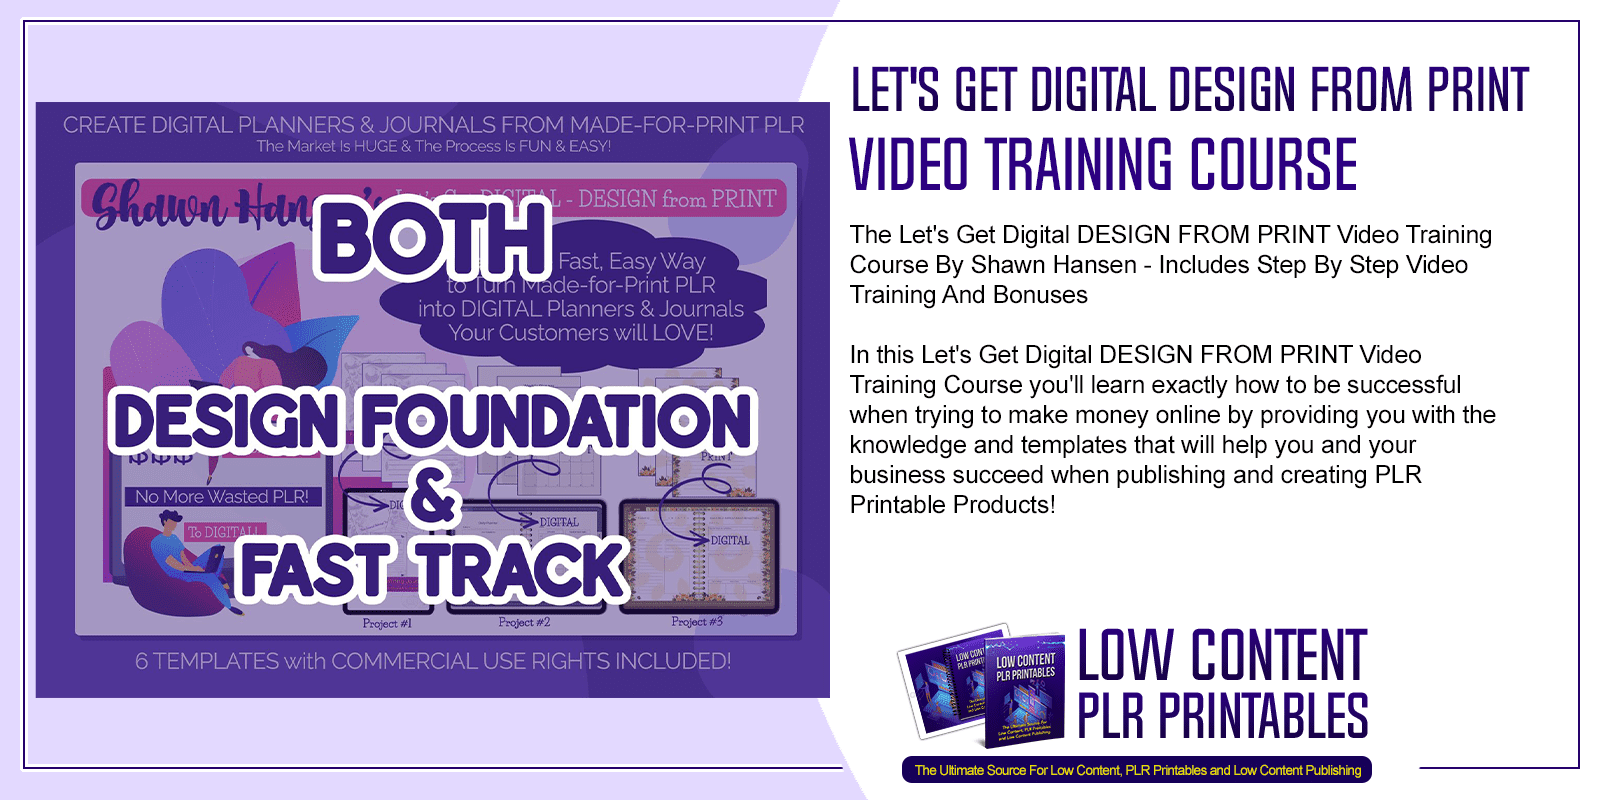 Lets Get Digital DESIGN FROM PRINT Video Training Course